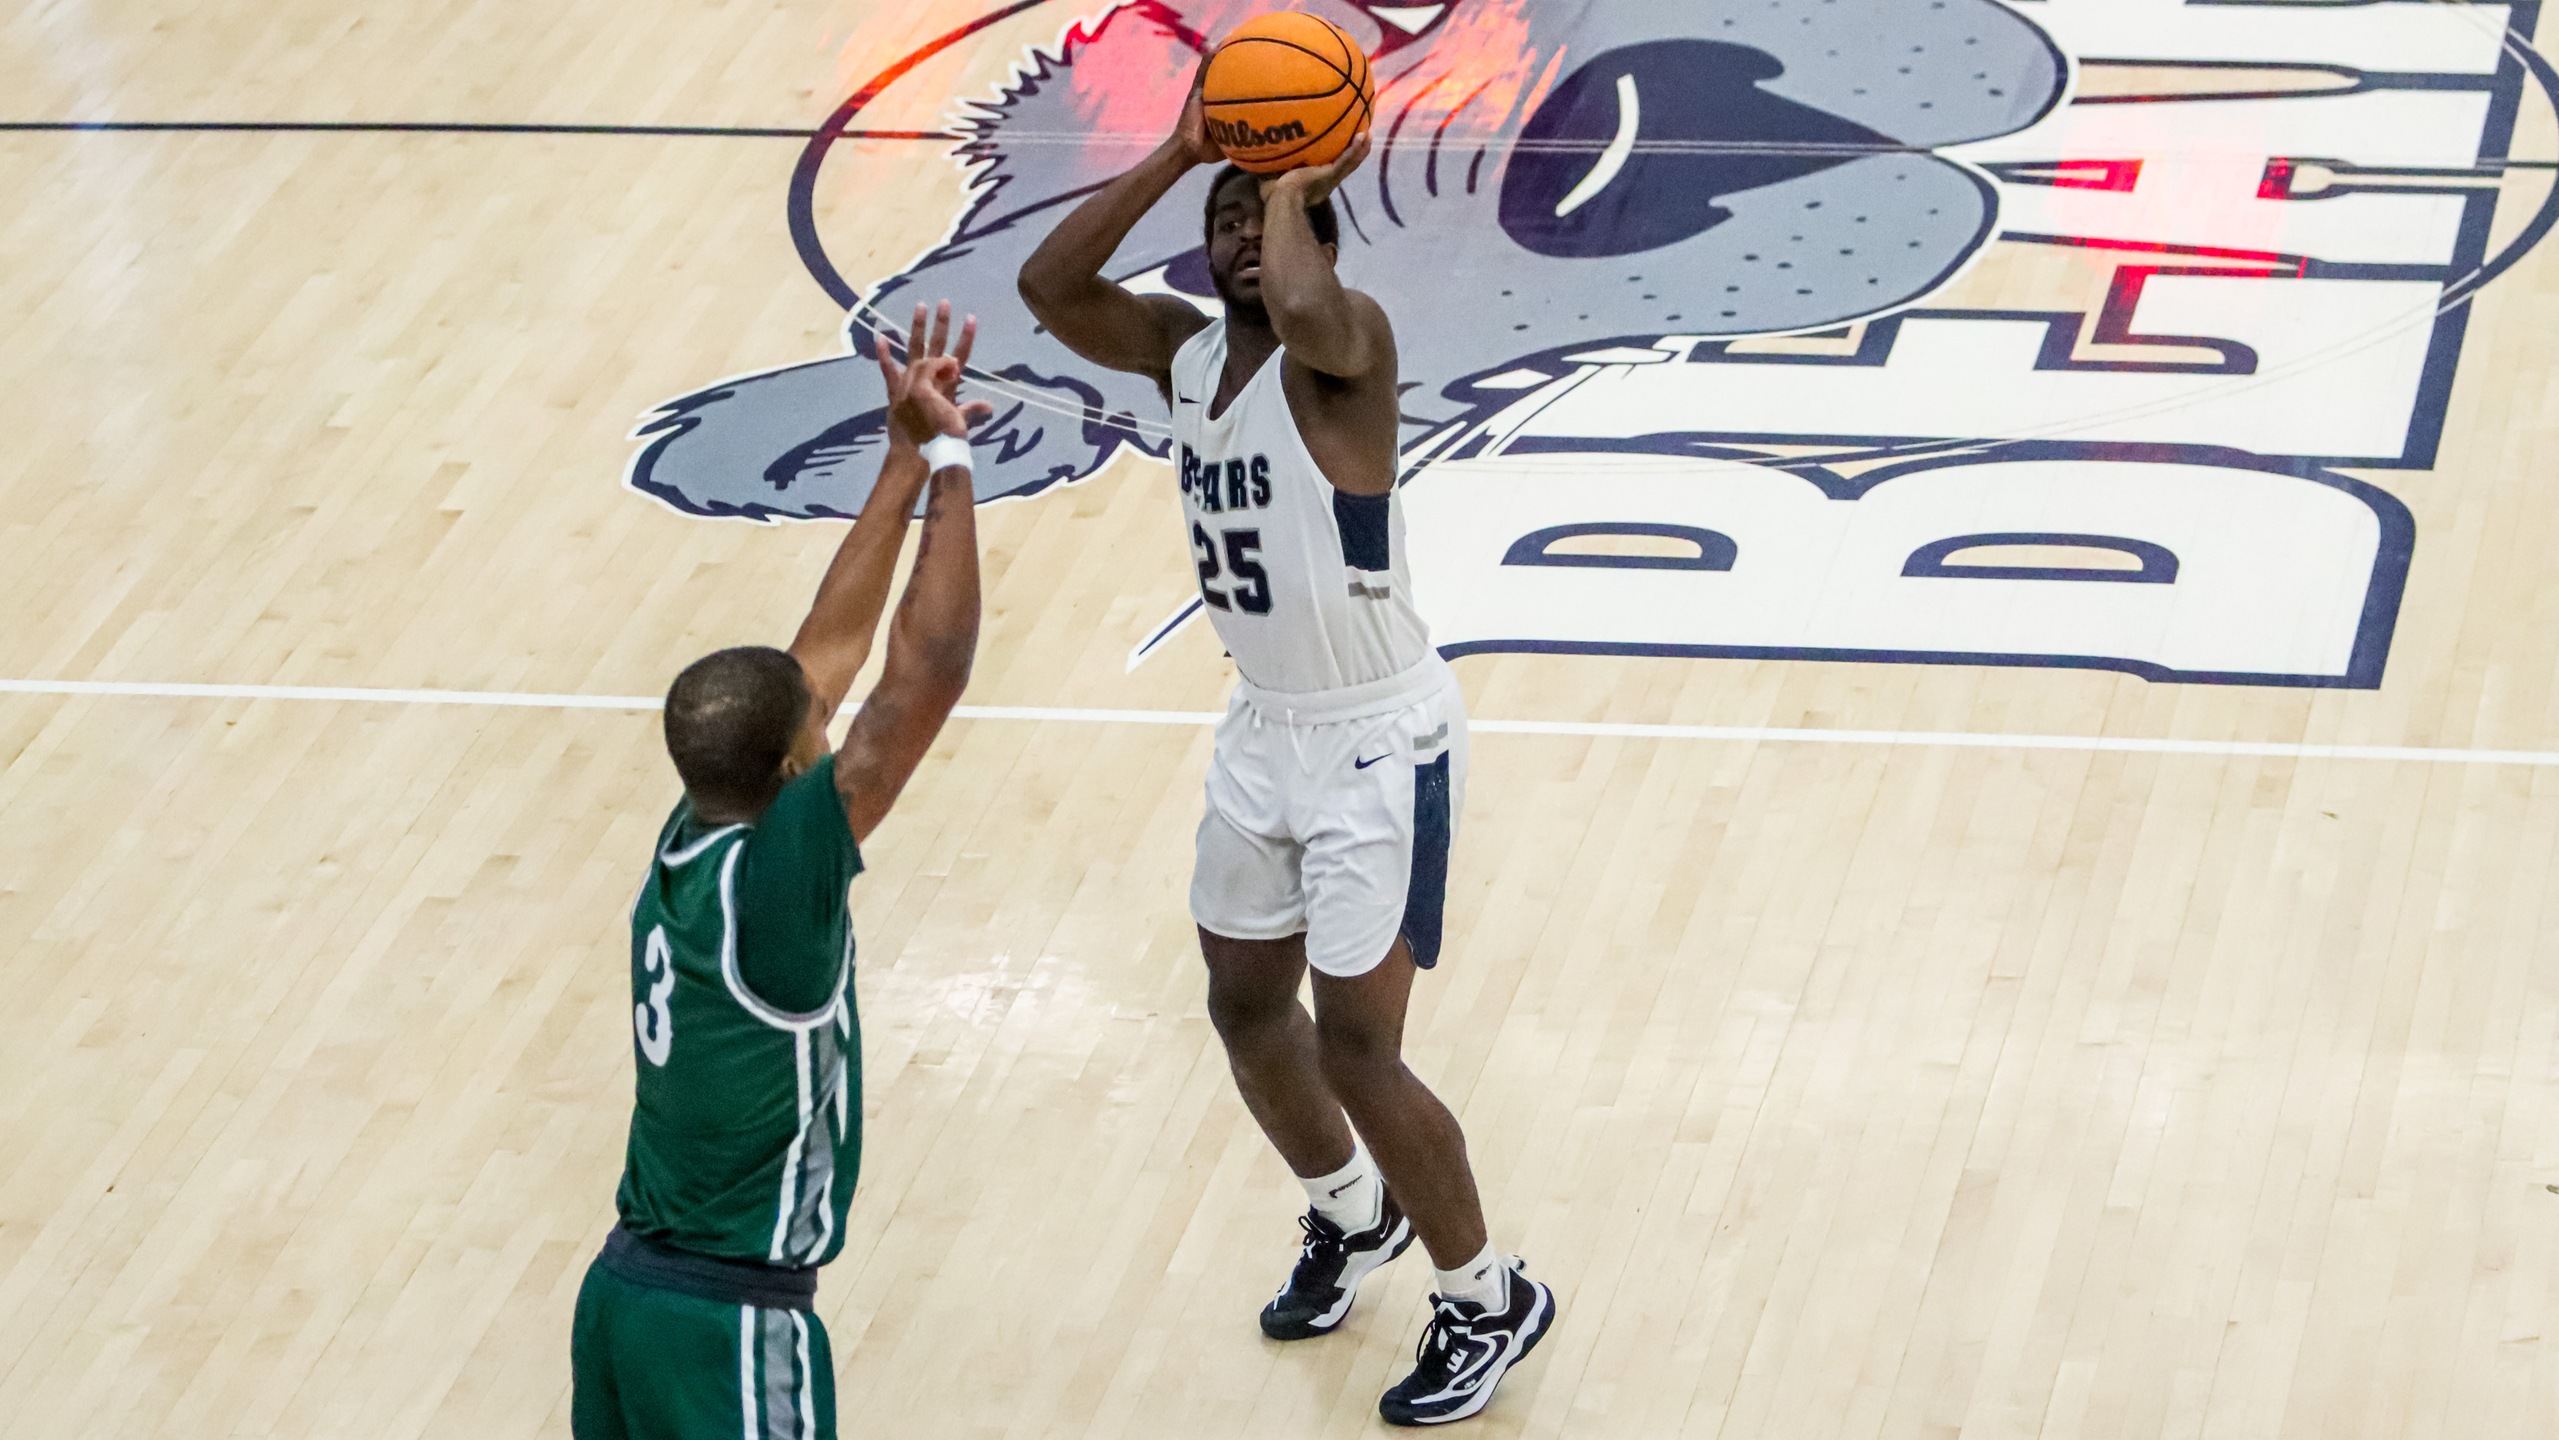 Men's Basketball Earns First Skyline Triumph in Close Affair with USMMA